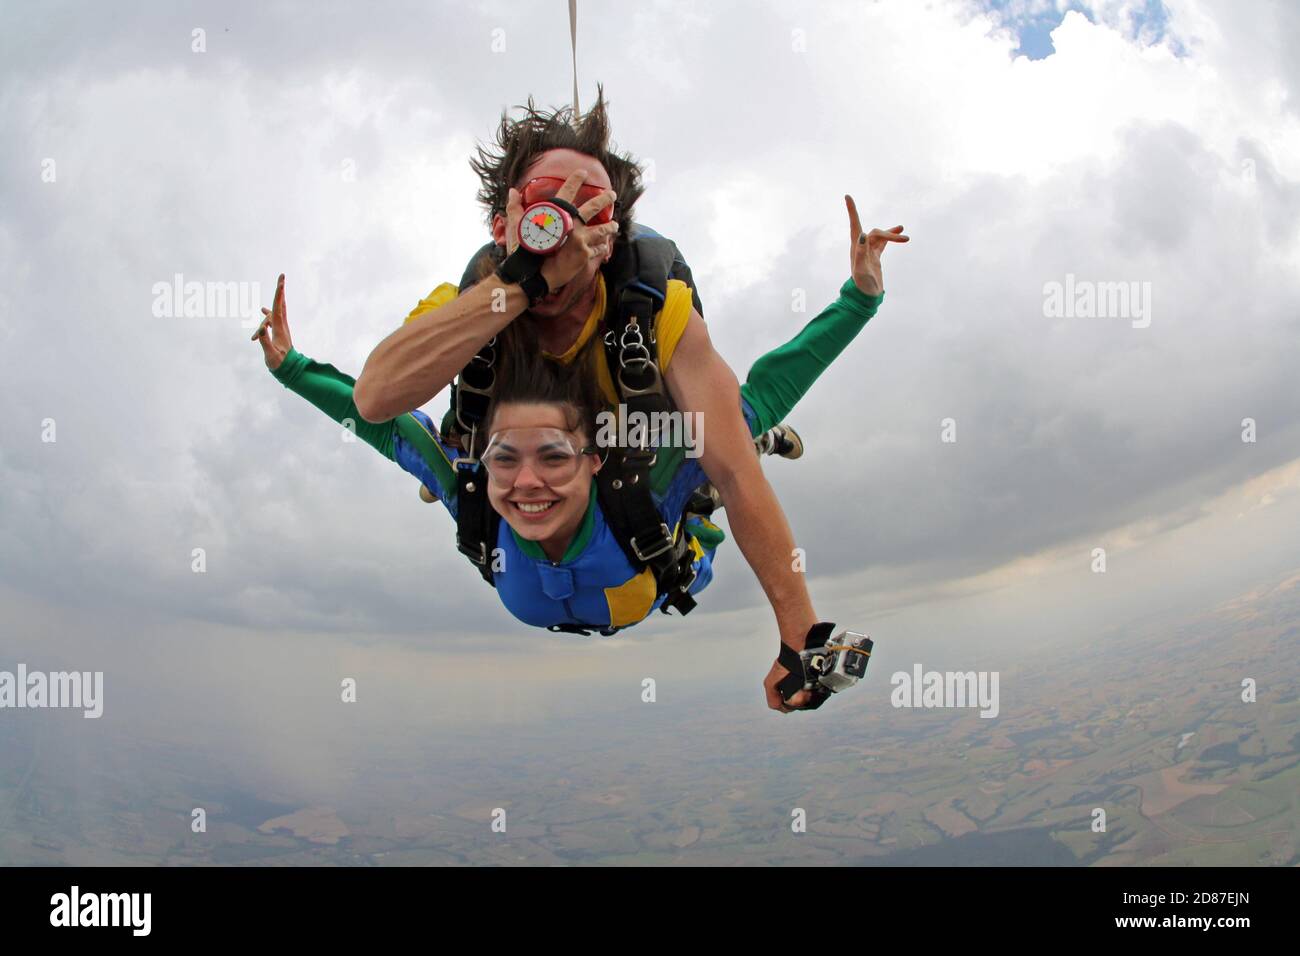 Skydiving tandem happiness on a cloudy day Stock Photo